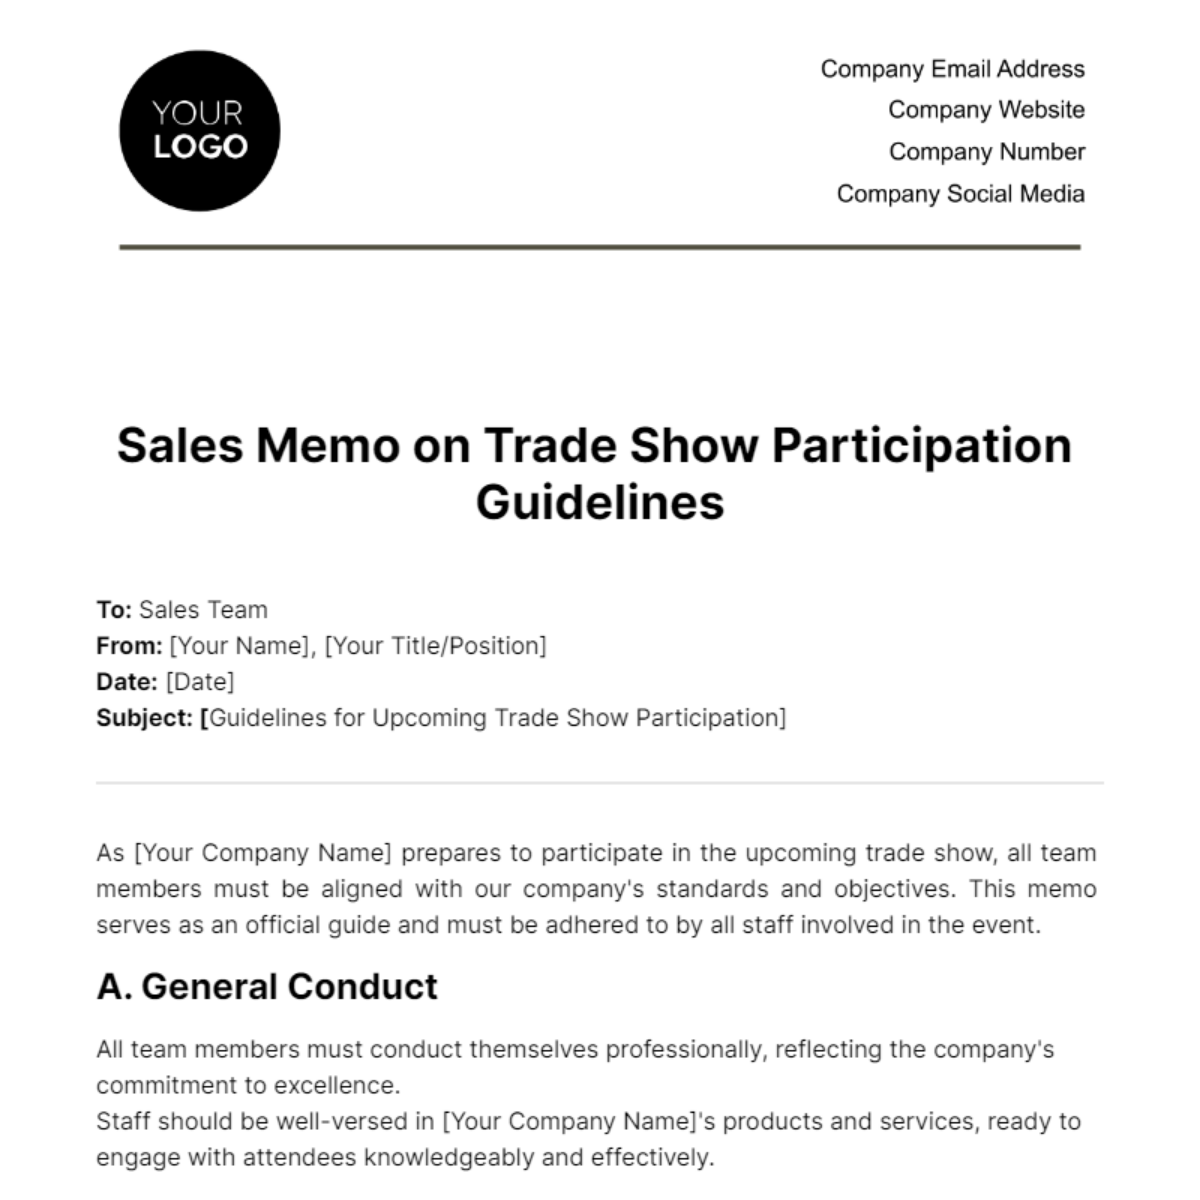 Free Sales Memo on Trade Show Participation Guidelines Template